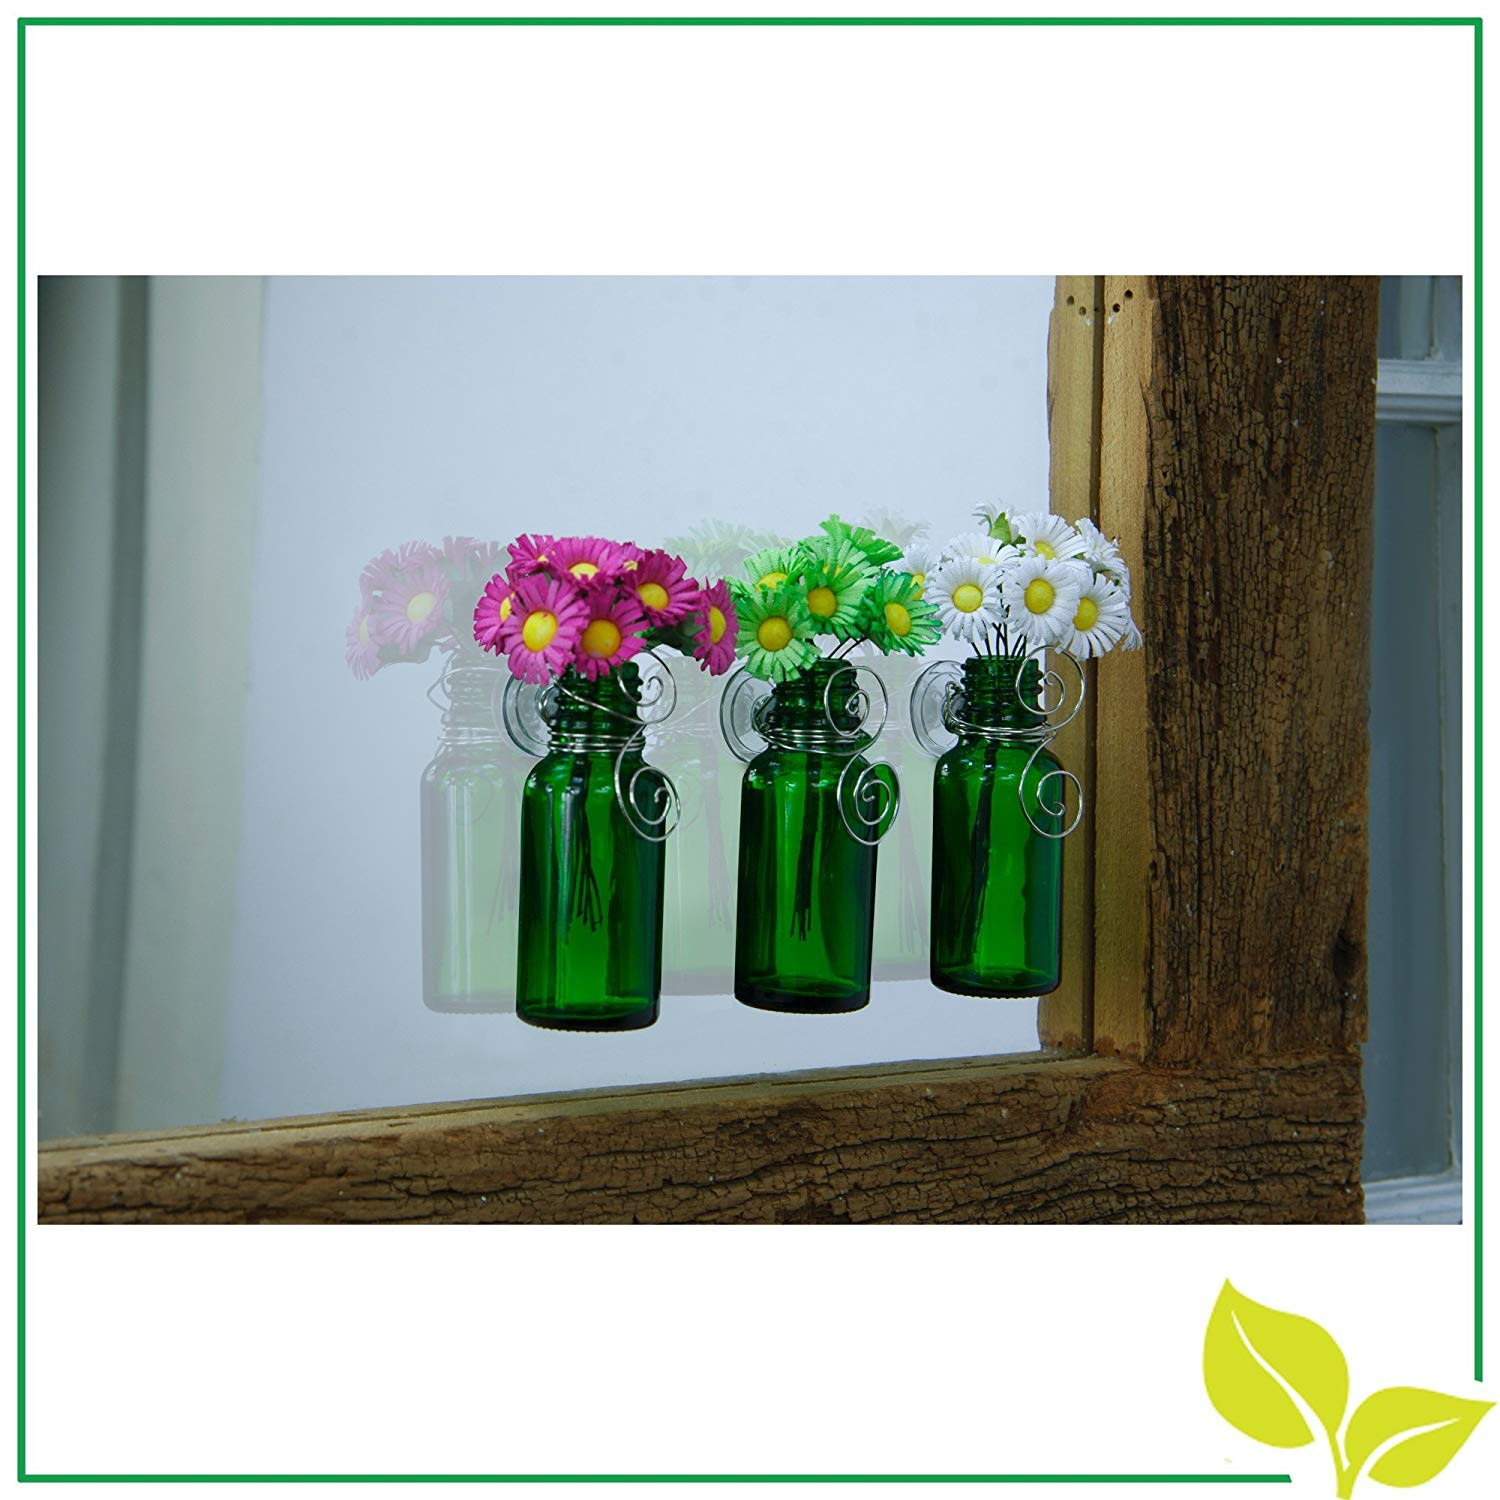 29 attractive 6 Inch Bud Vase 2024 free download 6 inch bud vase of amazon com vazzini mini vase bouquet suction cup bud bottle regarding amazon com vazzini mini vase bouquet suction cup bud bottle holder with flowers decorative for window